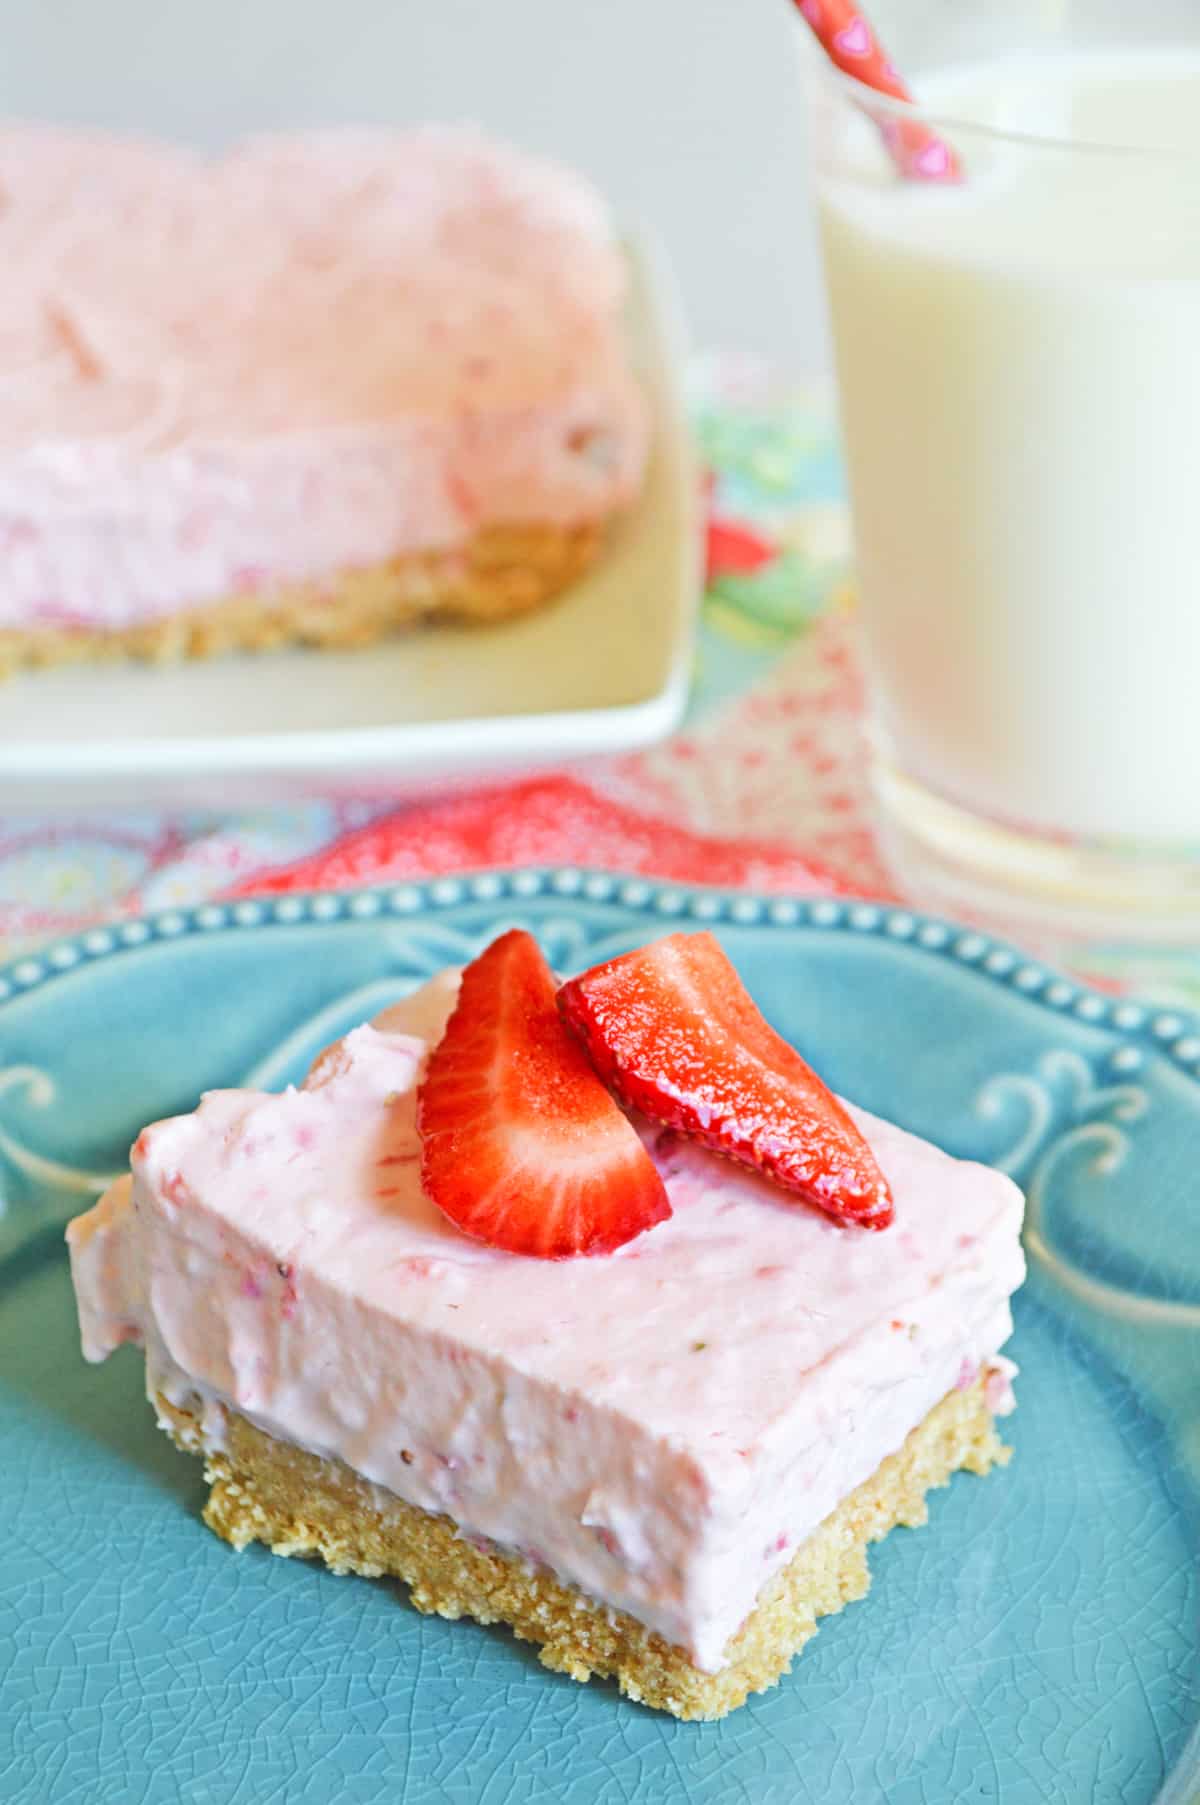 No-Bake Strawberry Cheesecake Bar with a thick graham cracker crust on blue plate topped with fresh strawberries. Glass of milk and remaining bars are in background.